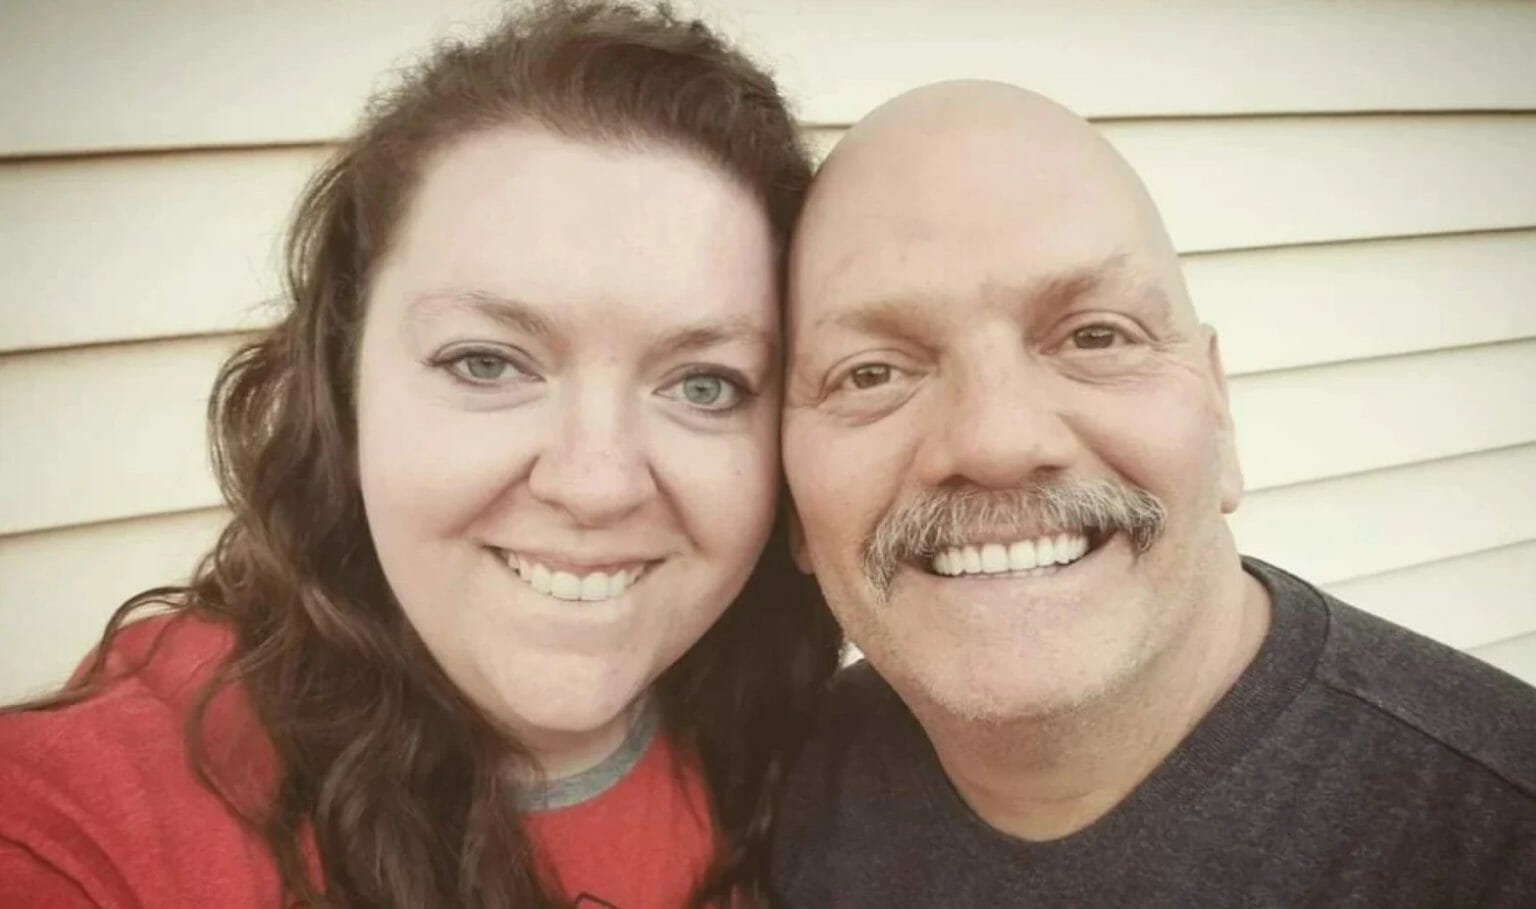 a man and woman pose, smiling, for a selfie